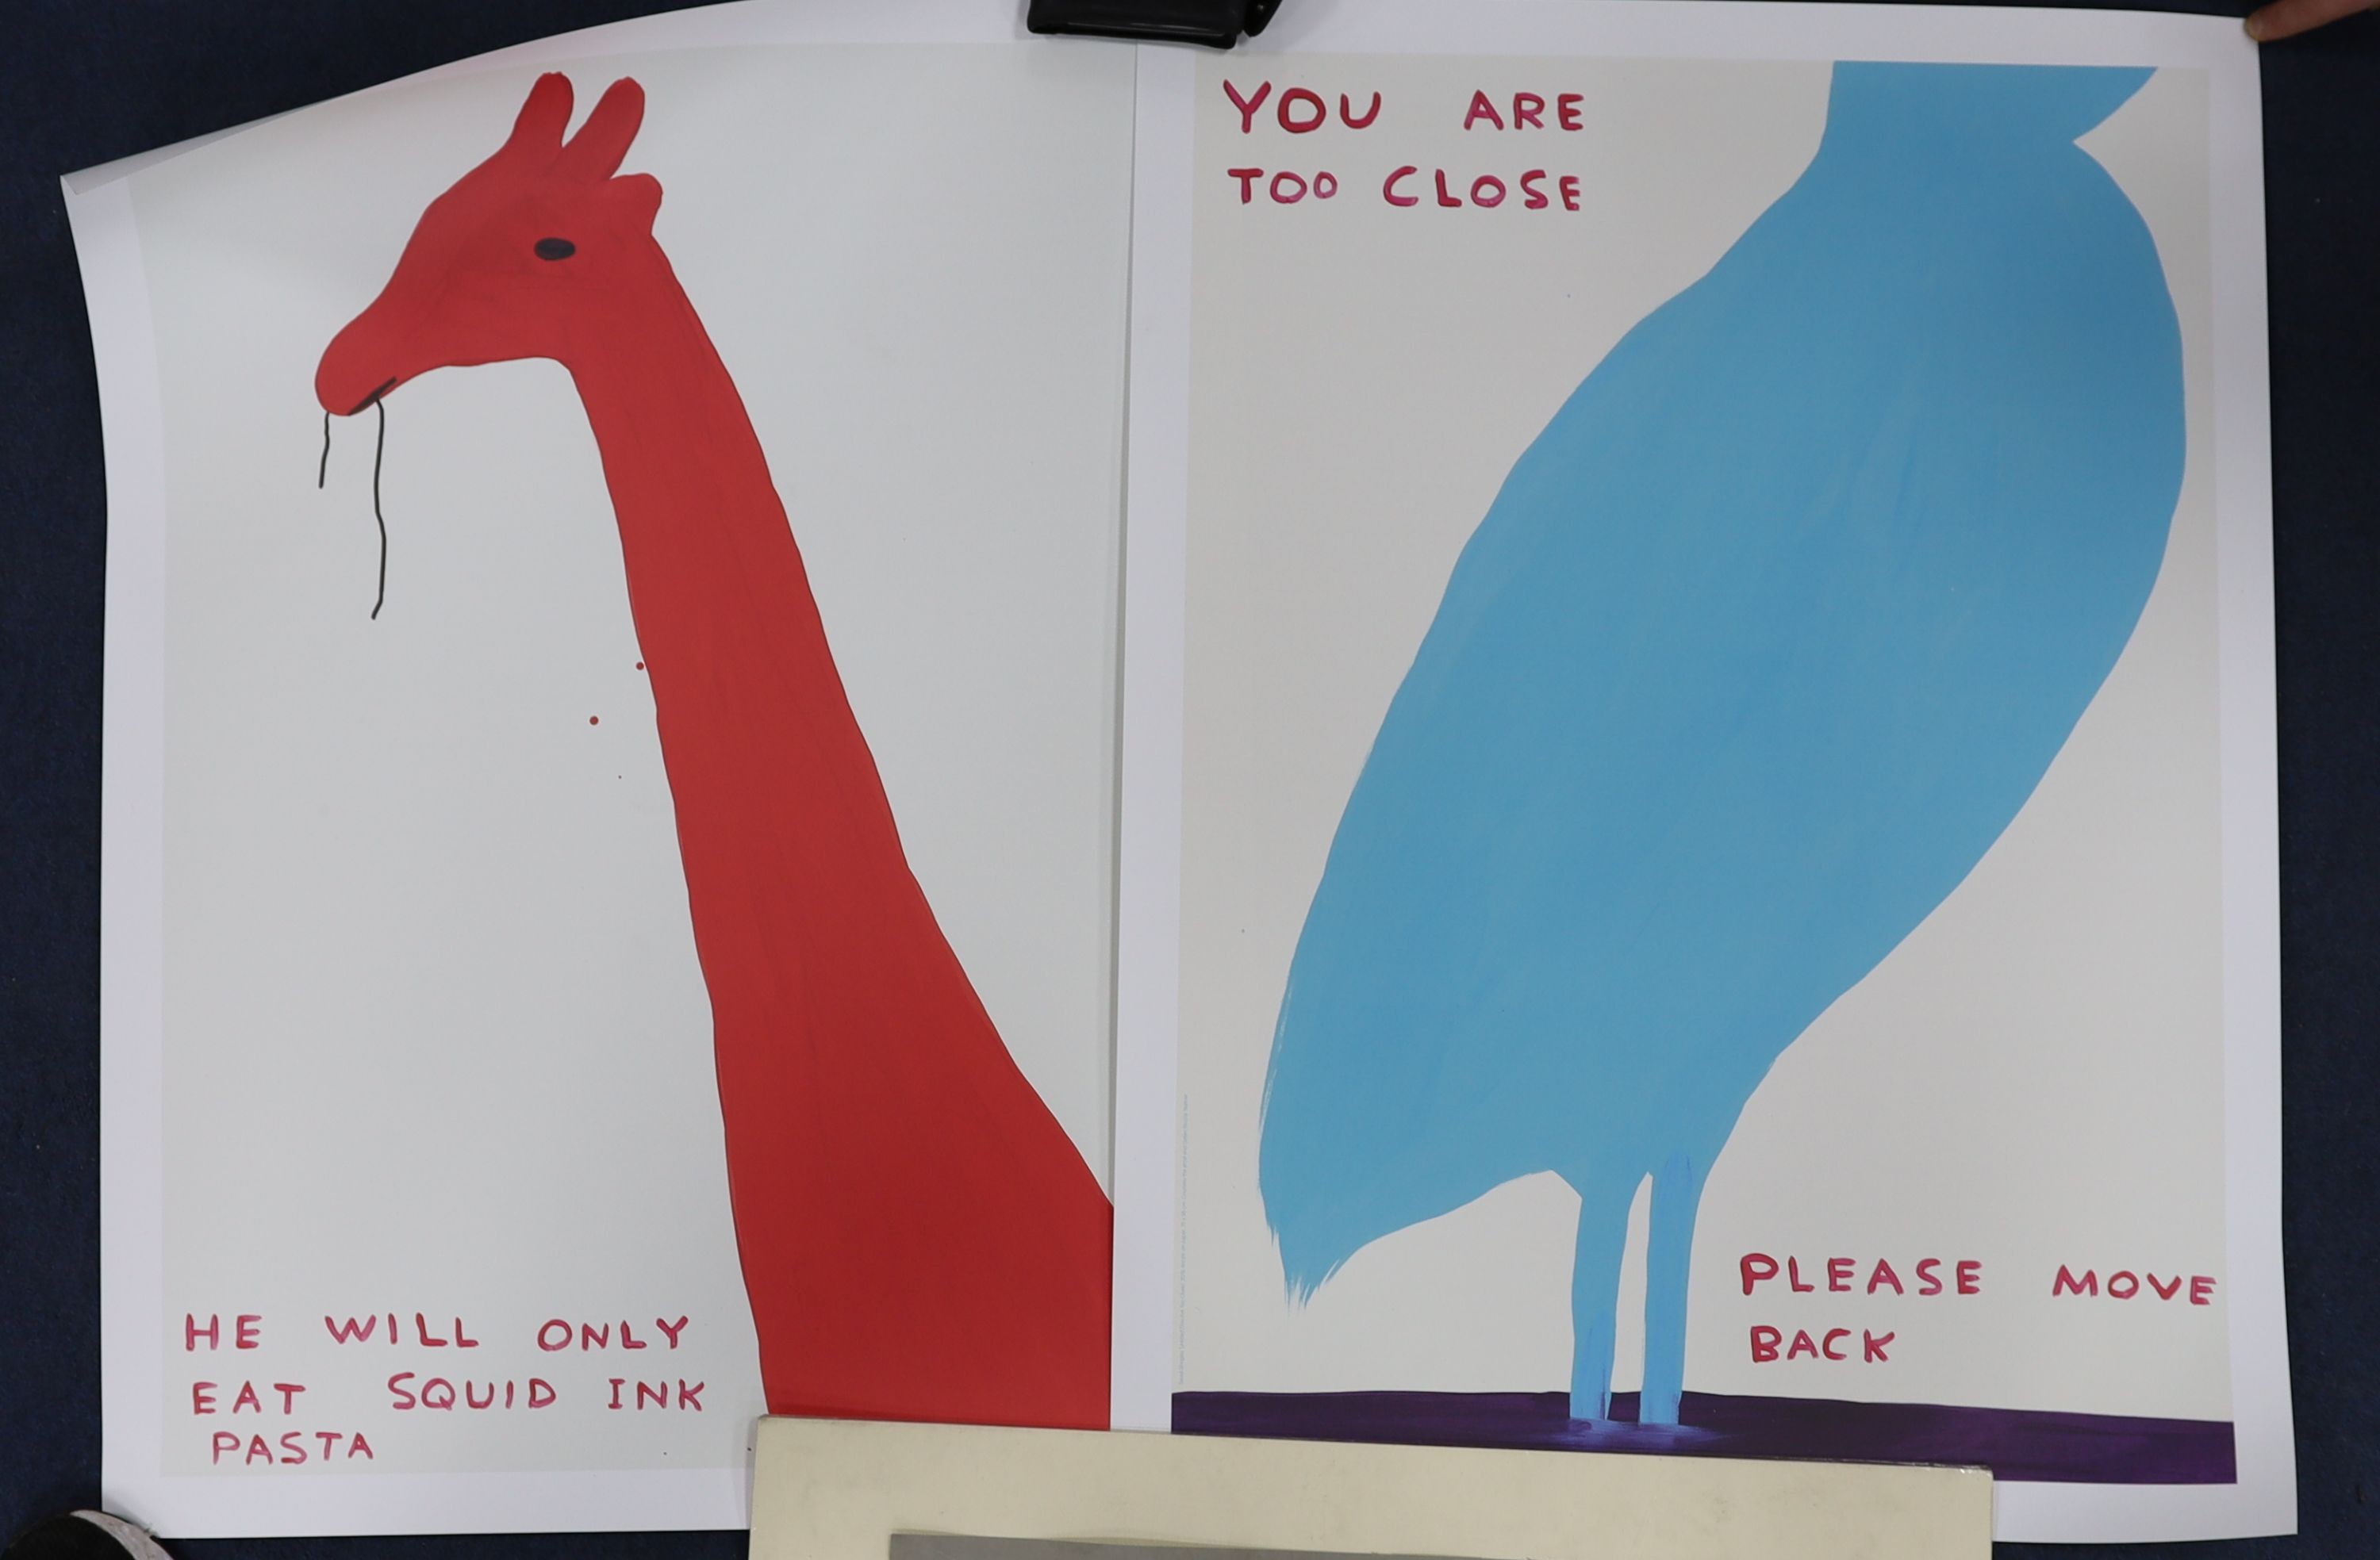 David Shrigley (1968-), two colour prints, 'You are too close' and 'He will only eat squid ink pasta', 80 x 60cm, unframed